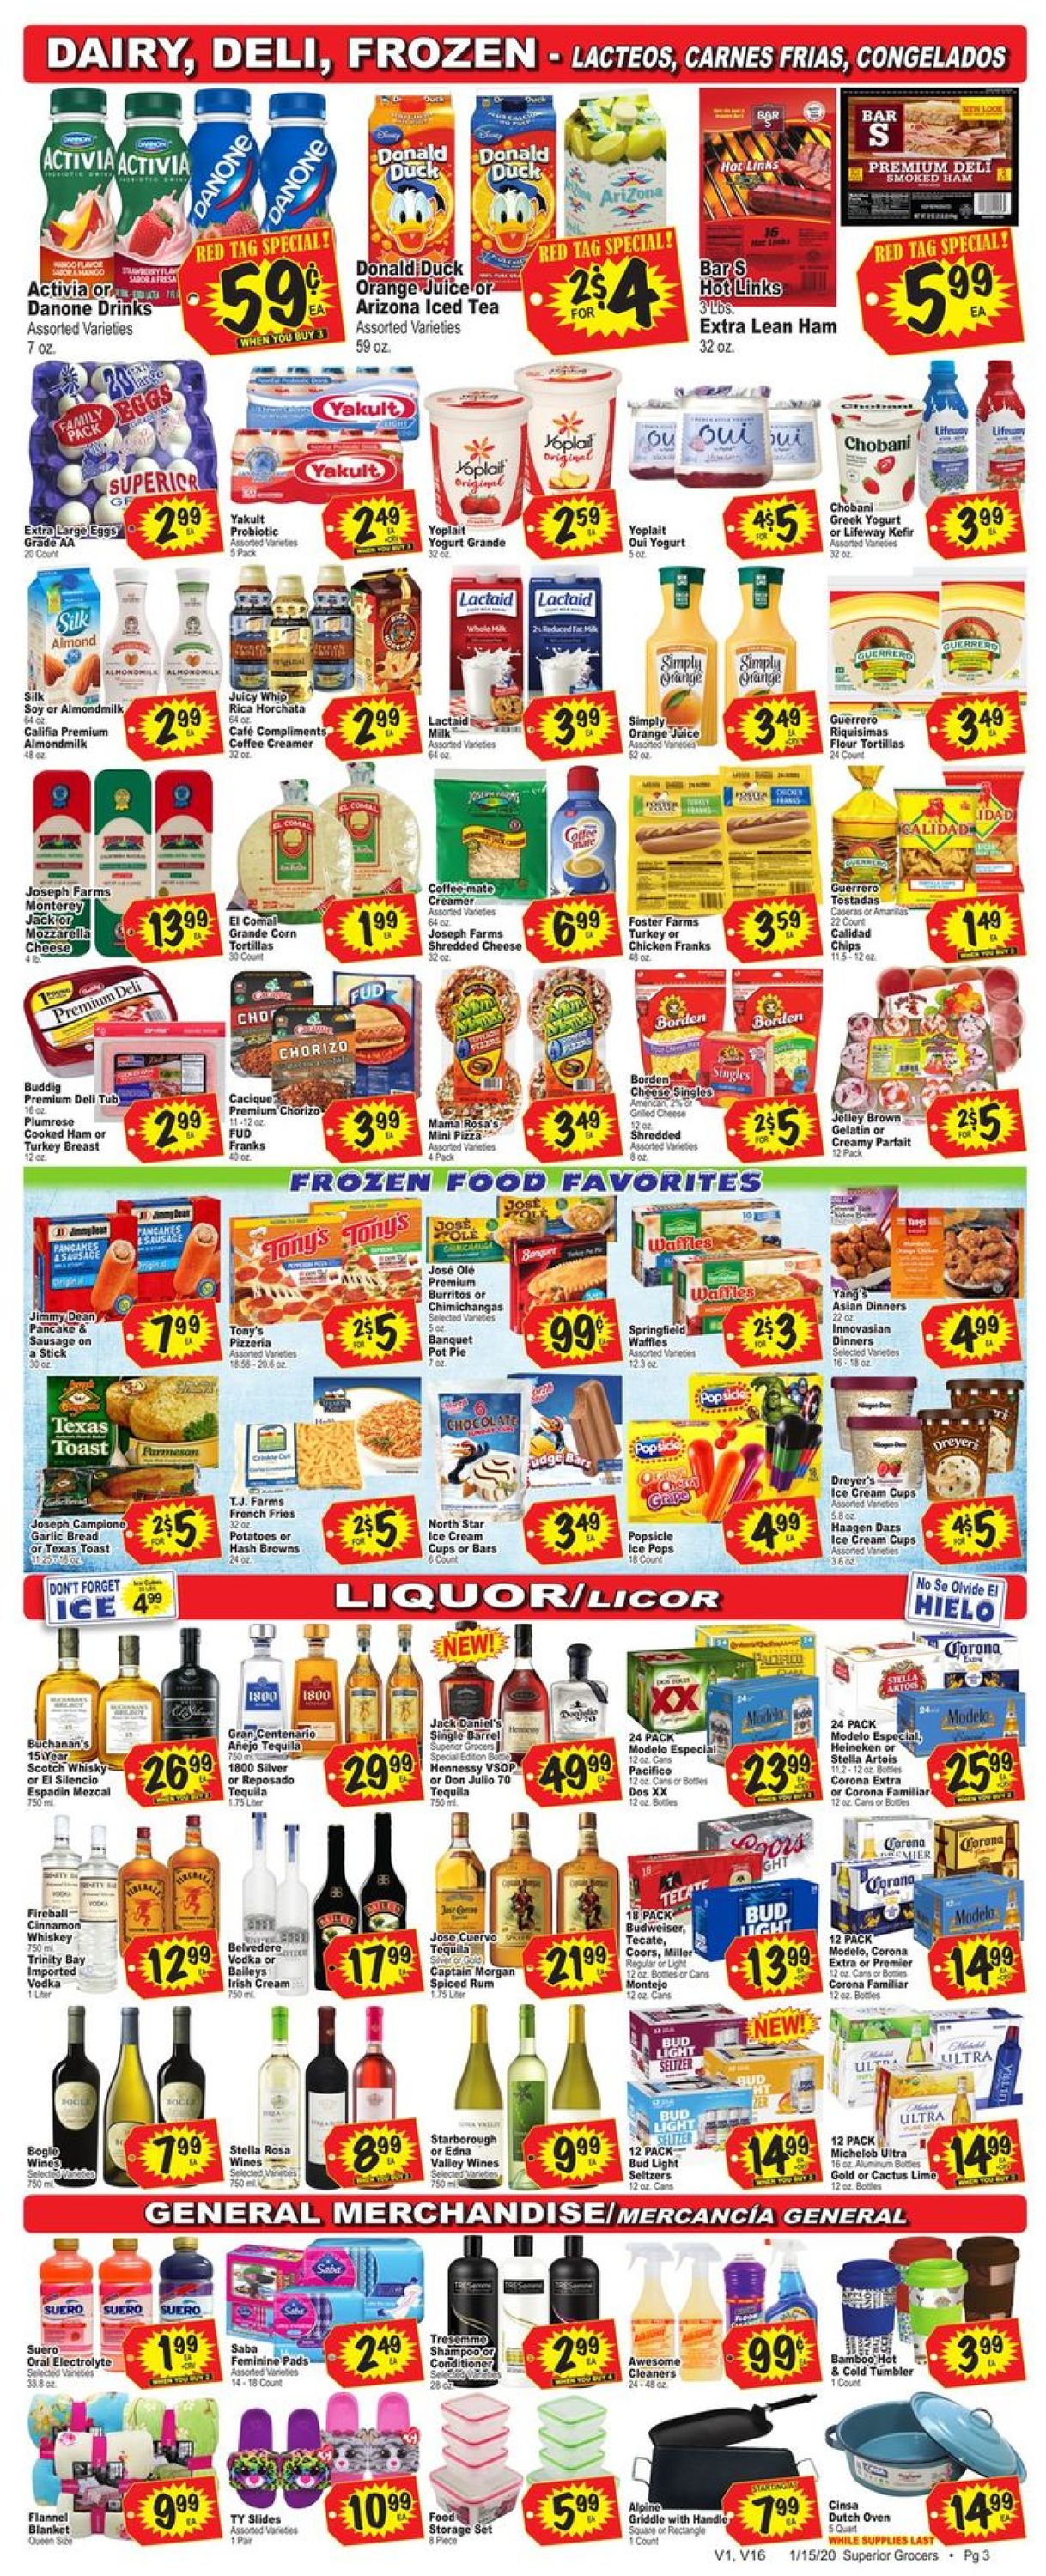 Catalogue Superior Grocers from 01/15/2020